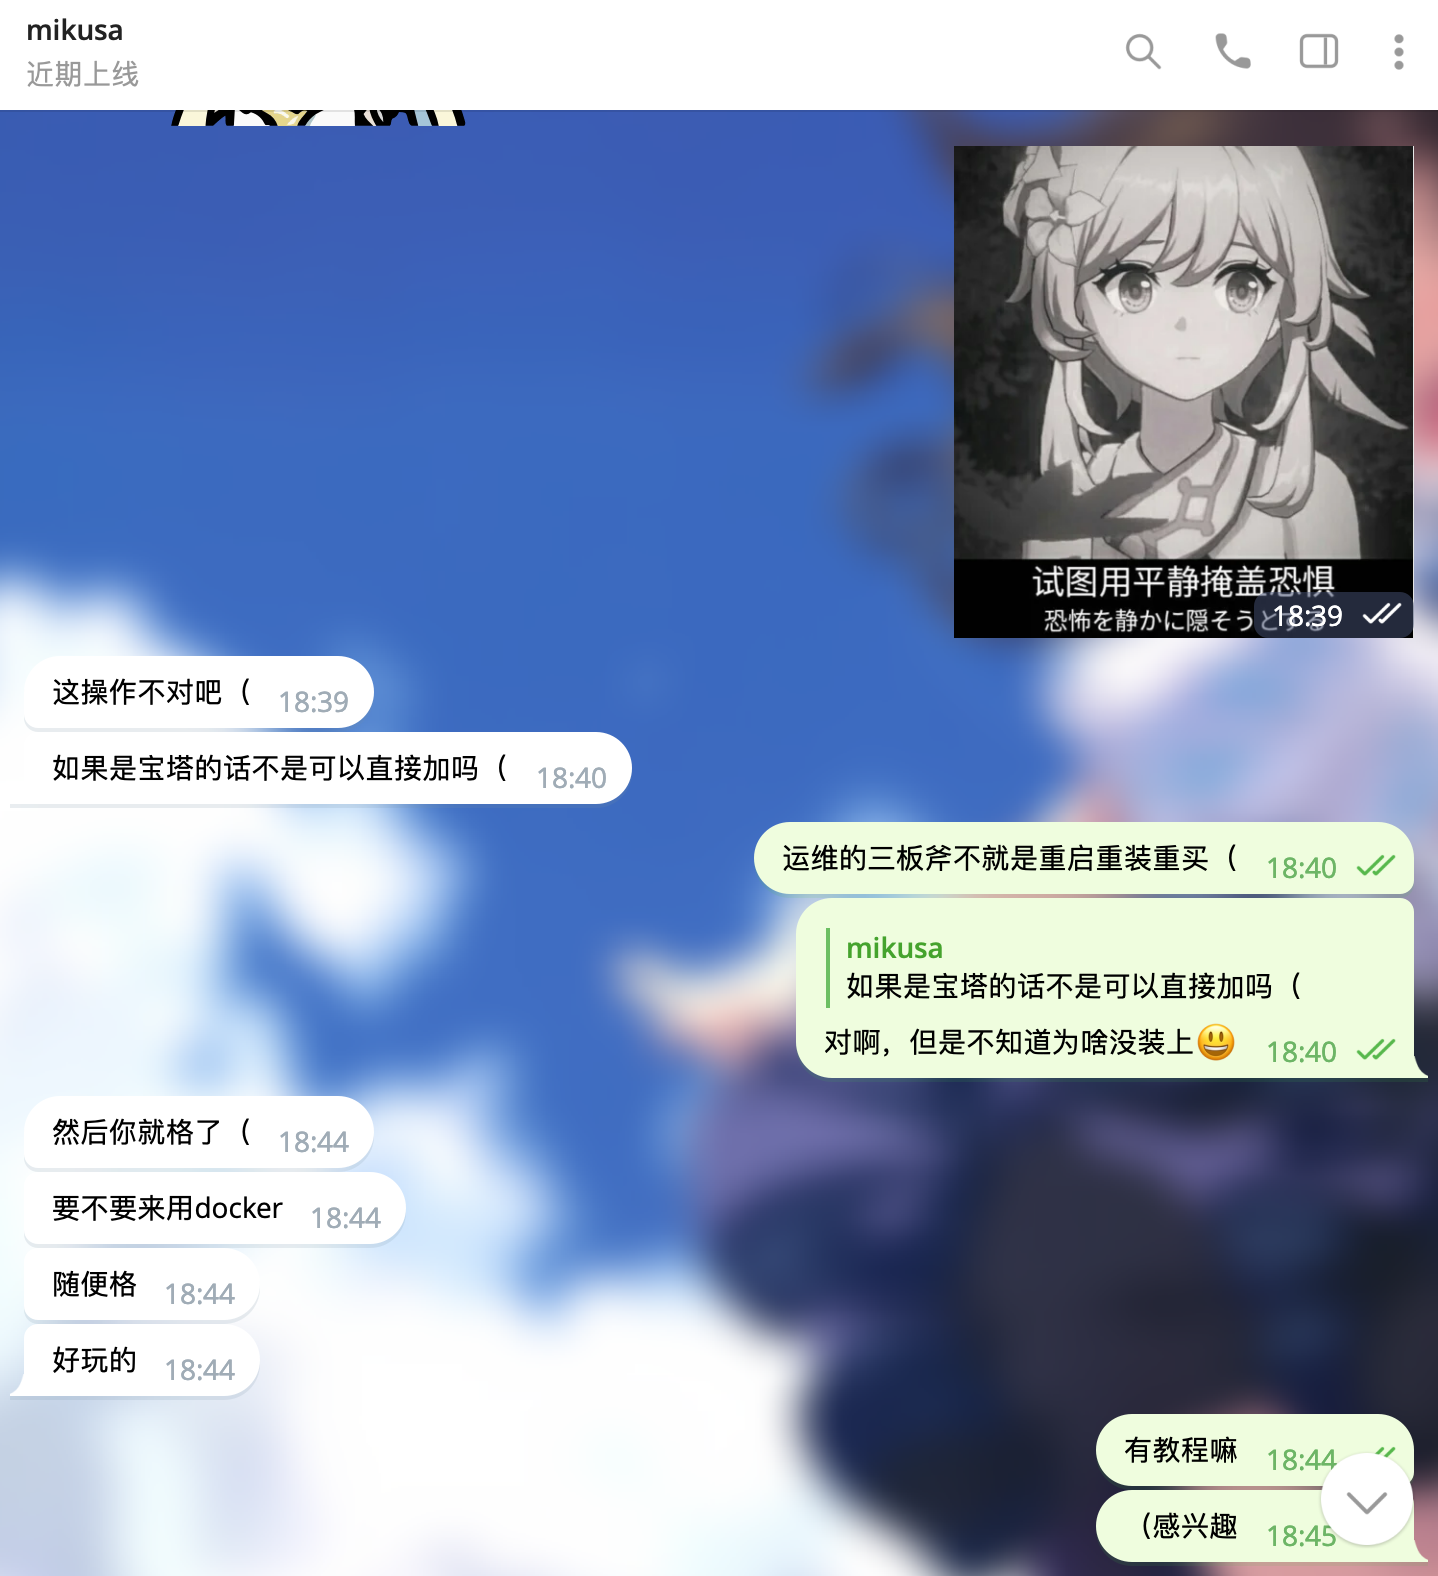 chat-with-mikusa-14142bd7c5c7bc35b.png